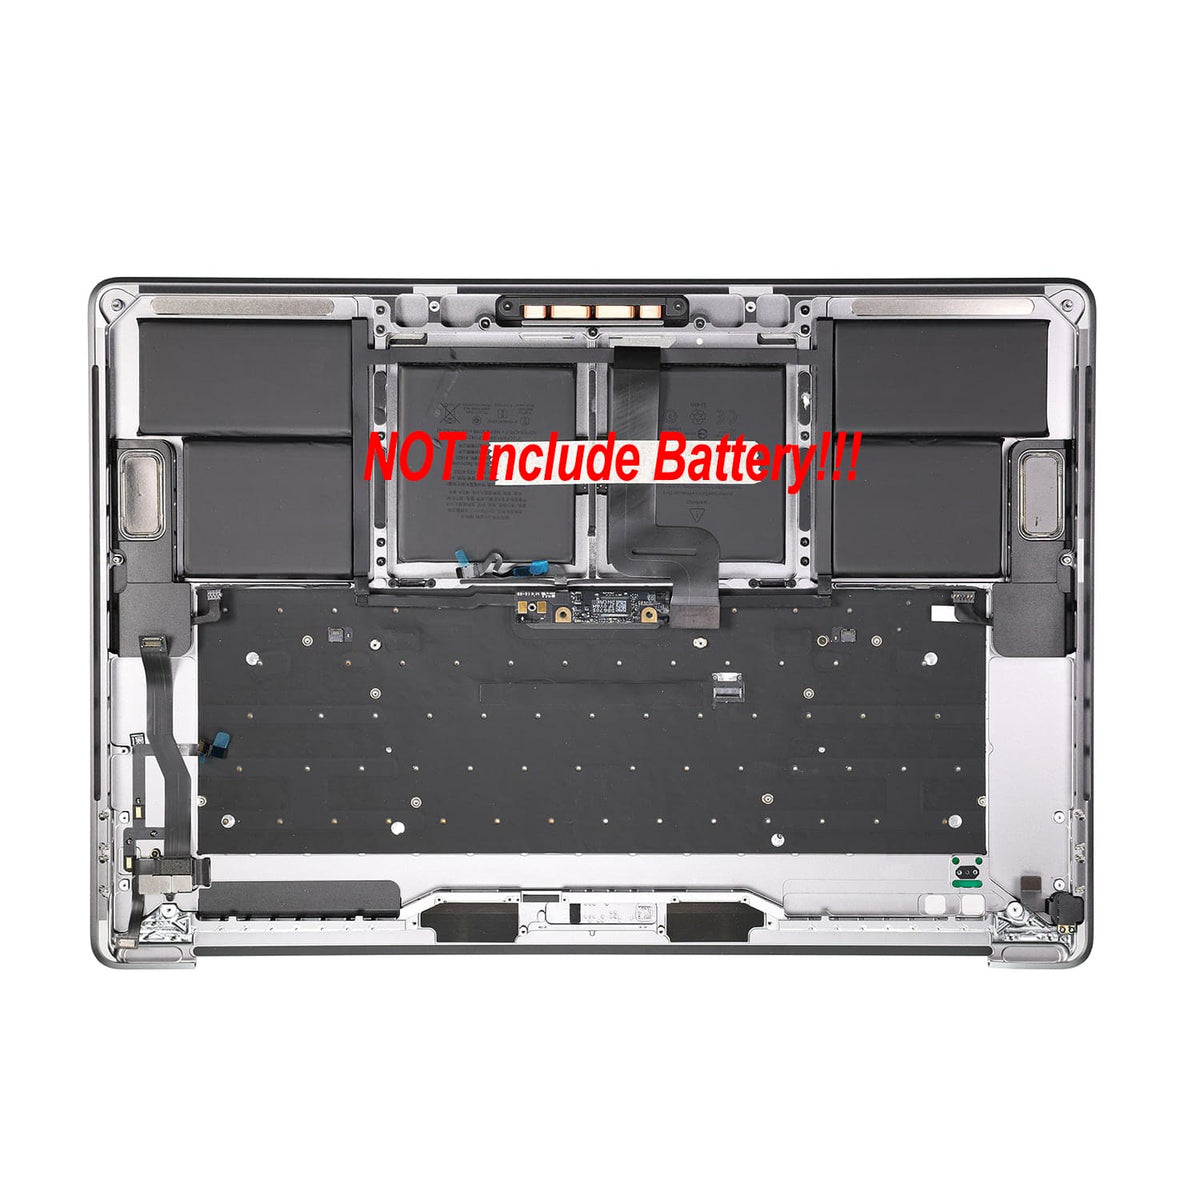 TOP CASE WITH US ENGLISH KEYBOARD FOR MACBOOK PRO 15" TOUCH A1707 (LATE 2016-MID 2017) - SPACE GRAY